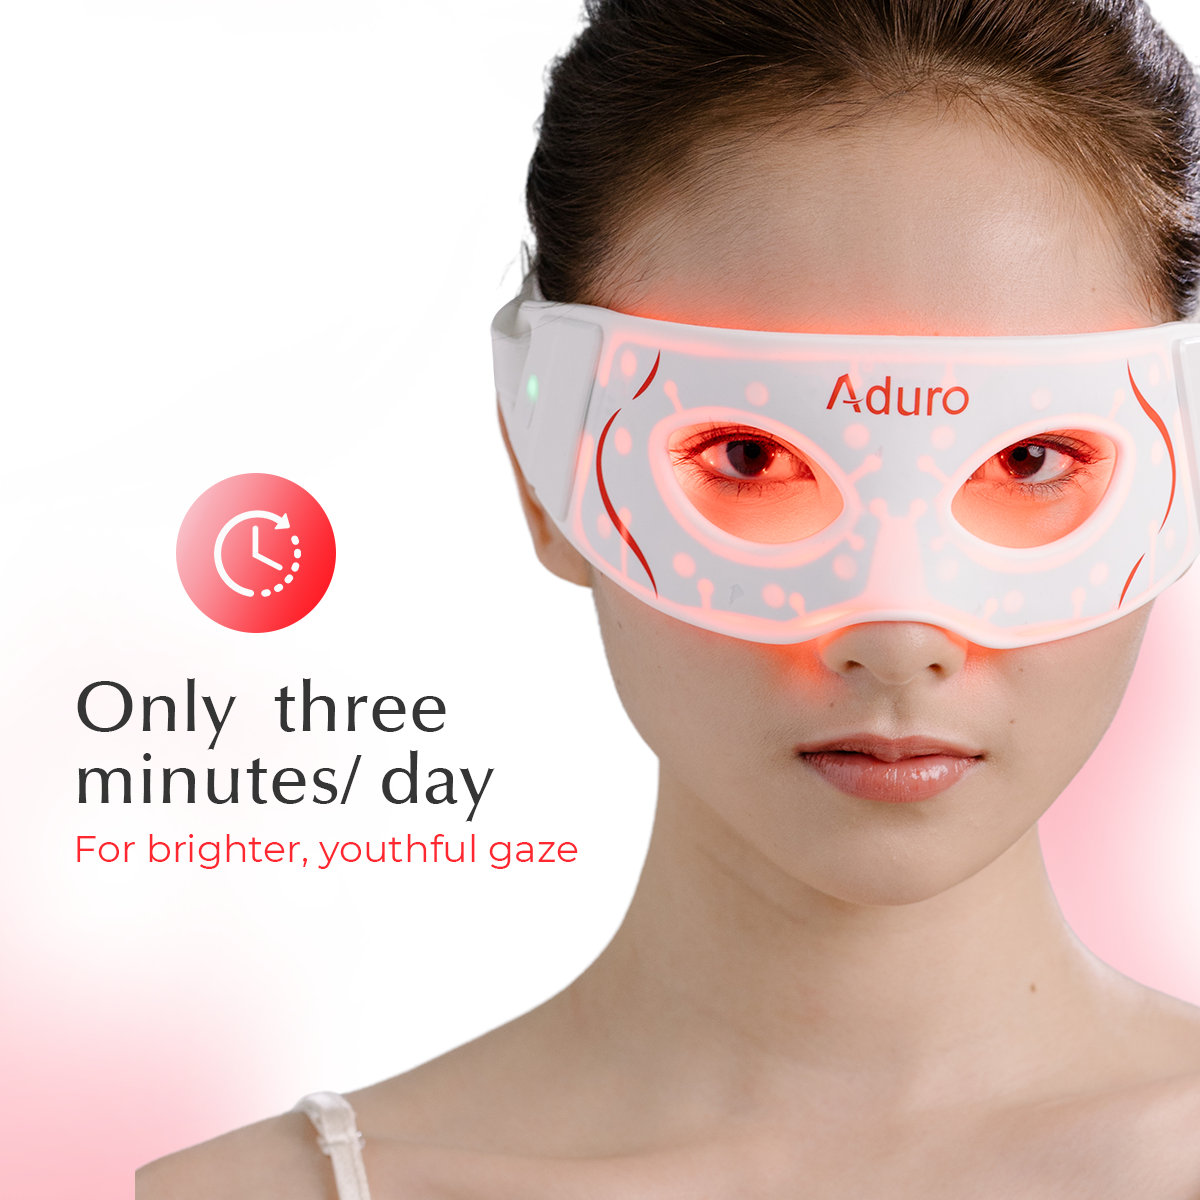 Aduro | Classic | Luxury bundle | Eye Mask + Neck and Décolleté Mask + Gift